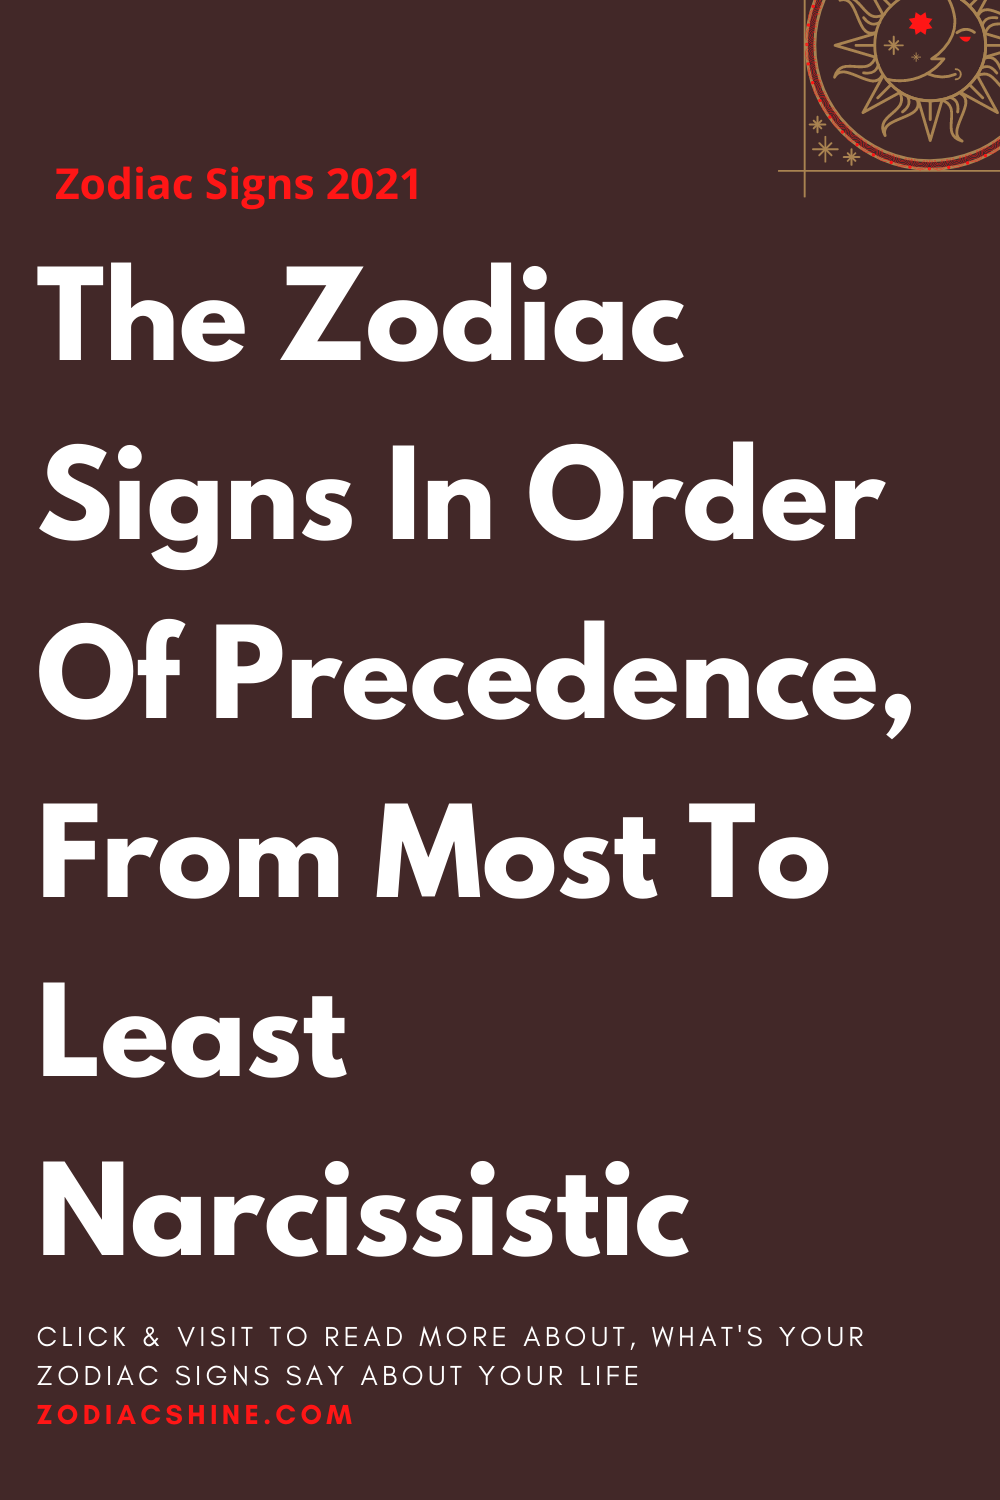 The Zodiac Signs In Order Of Precedence, From Most To Least Narcissistic